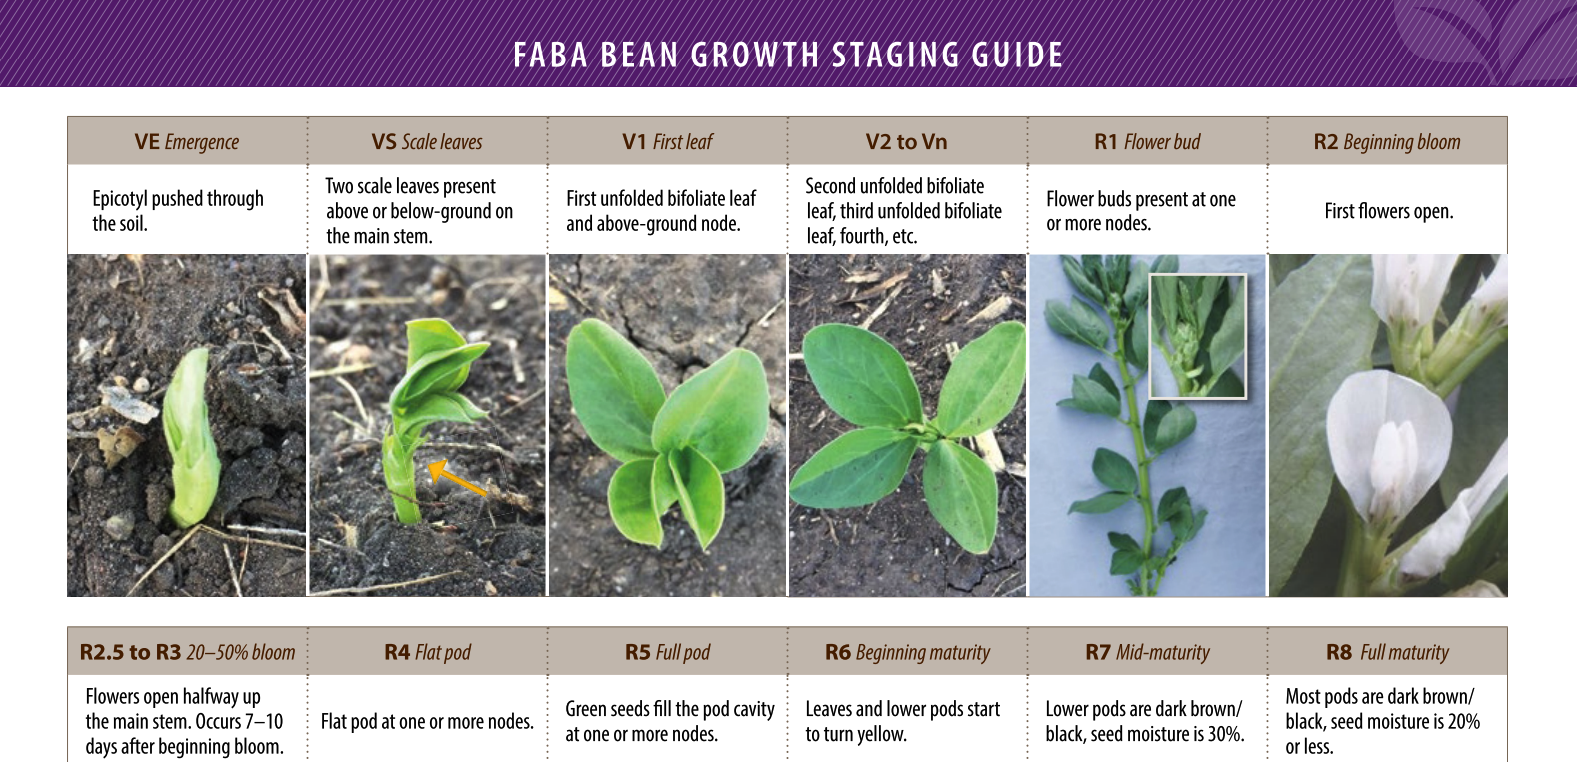 Faba Bean Growth Staging Guide